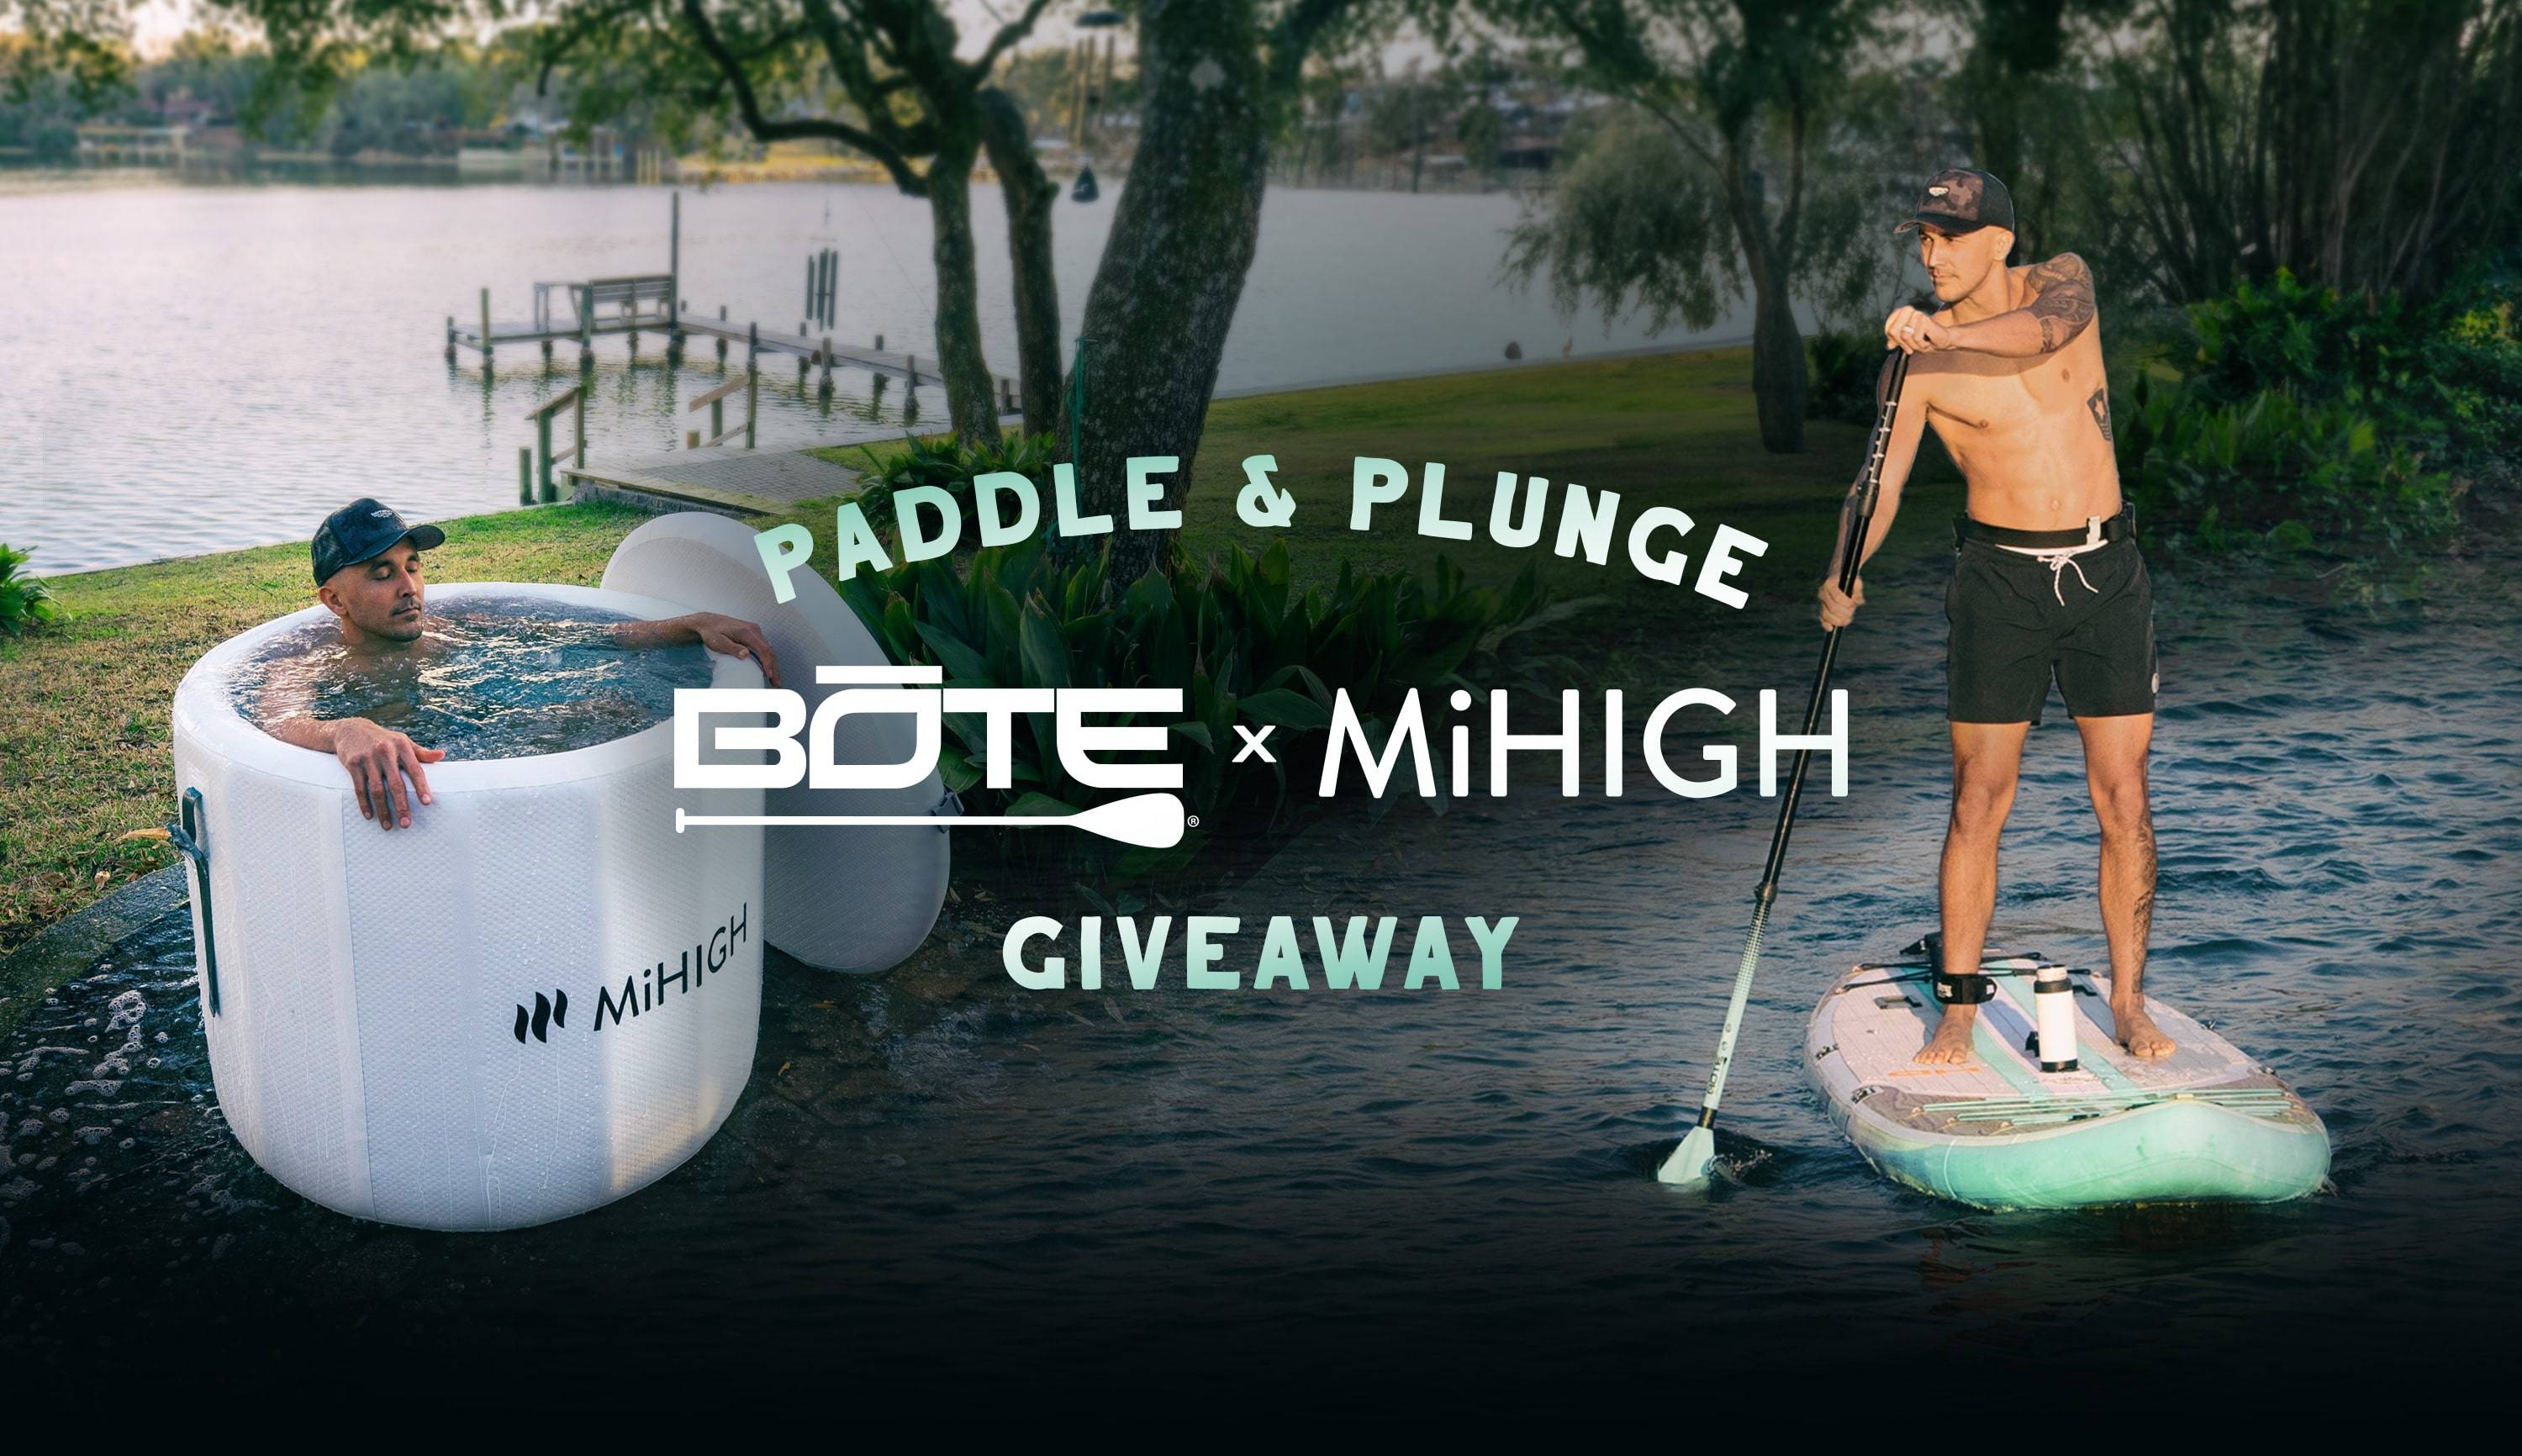 BOTE x MiHIGH Paddle & Plunge Giveaway